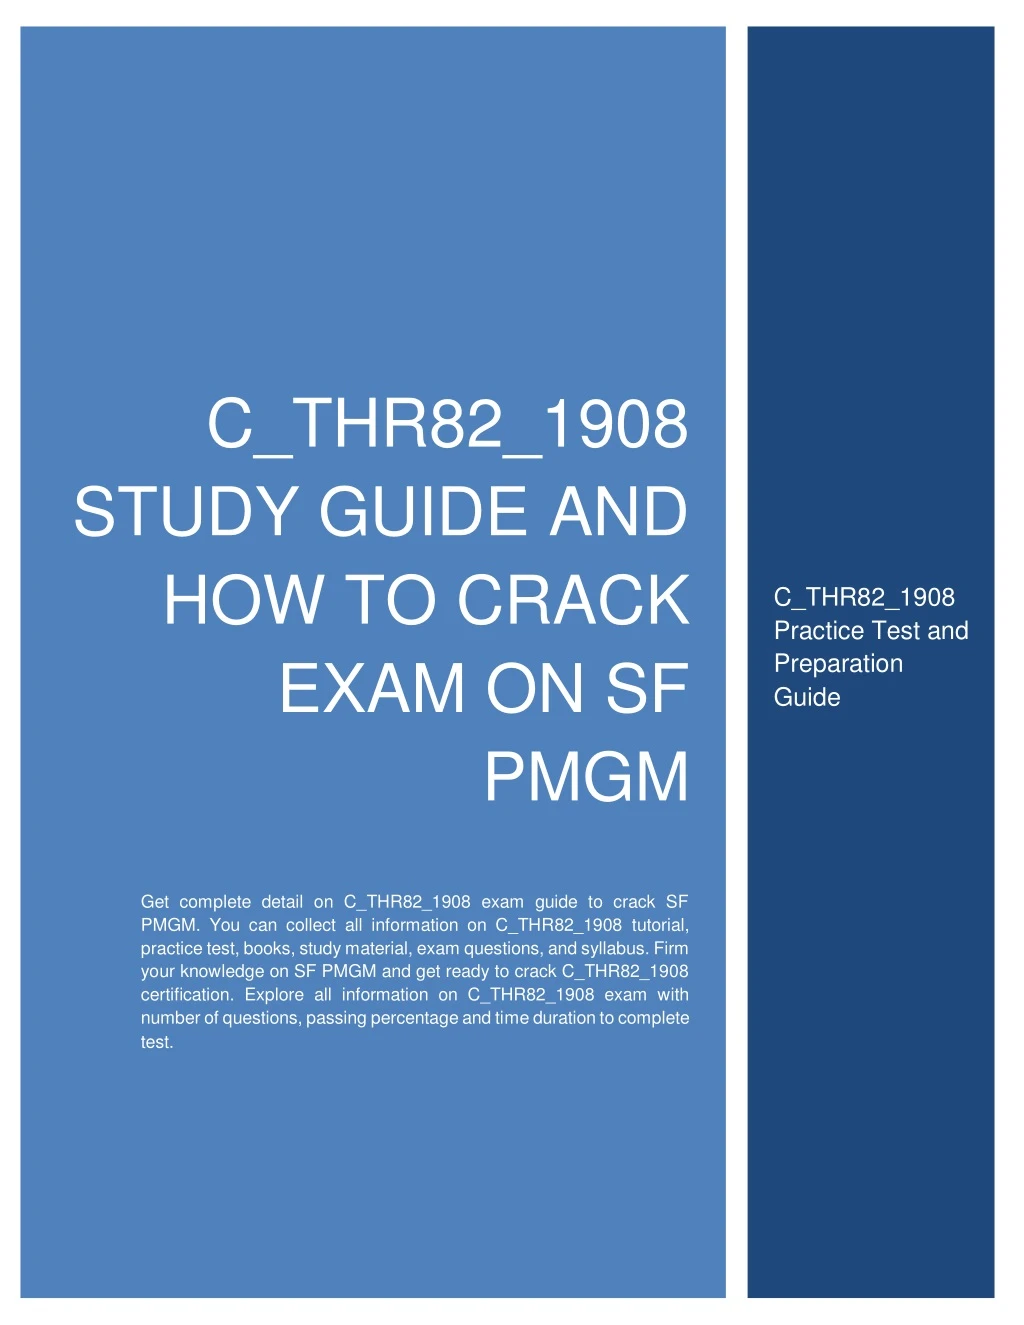 c thr82 1908 study guide and how to crack exam